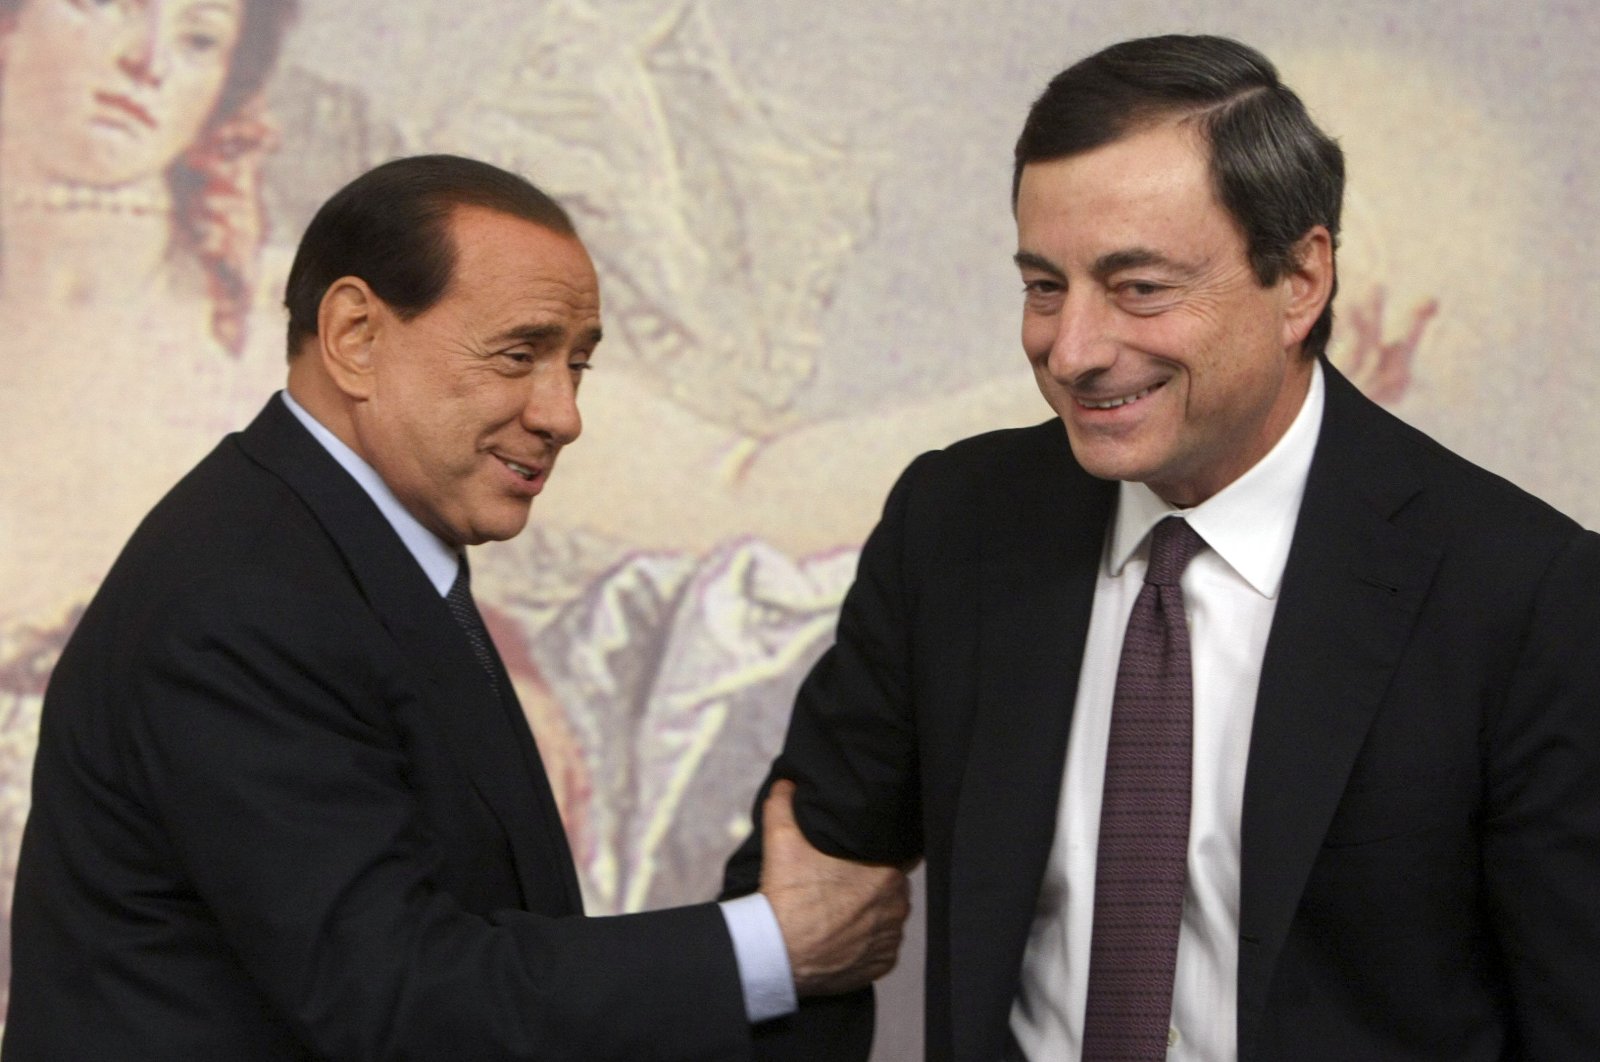 Former and present Italian Prime Ministers Silvio Berlusconi (L) and Mario Draghi are seen during a press conference at Chigi Palace, Rome, Italy, Oct. 8, 2008. (AP Photo)